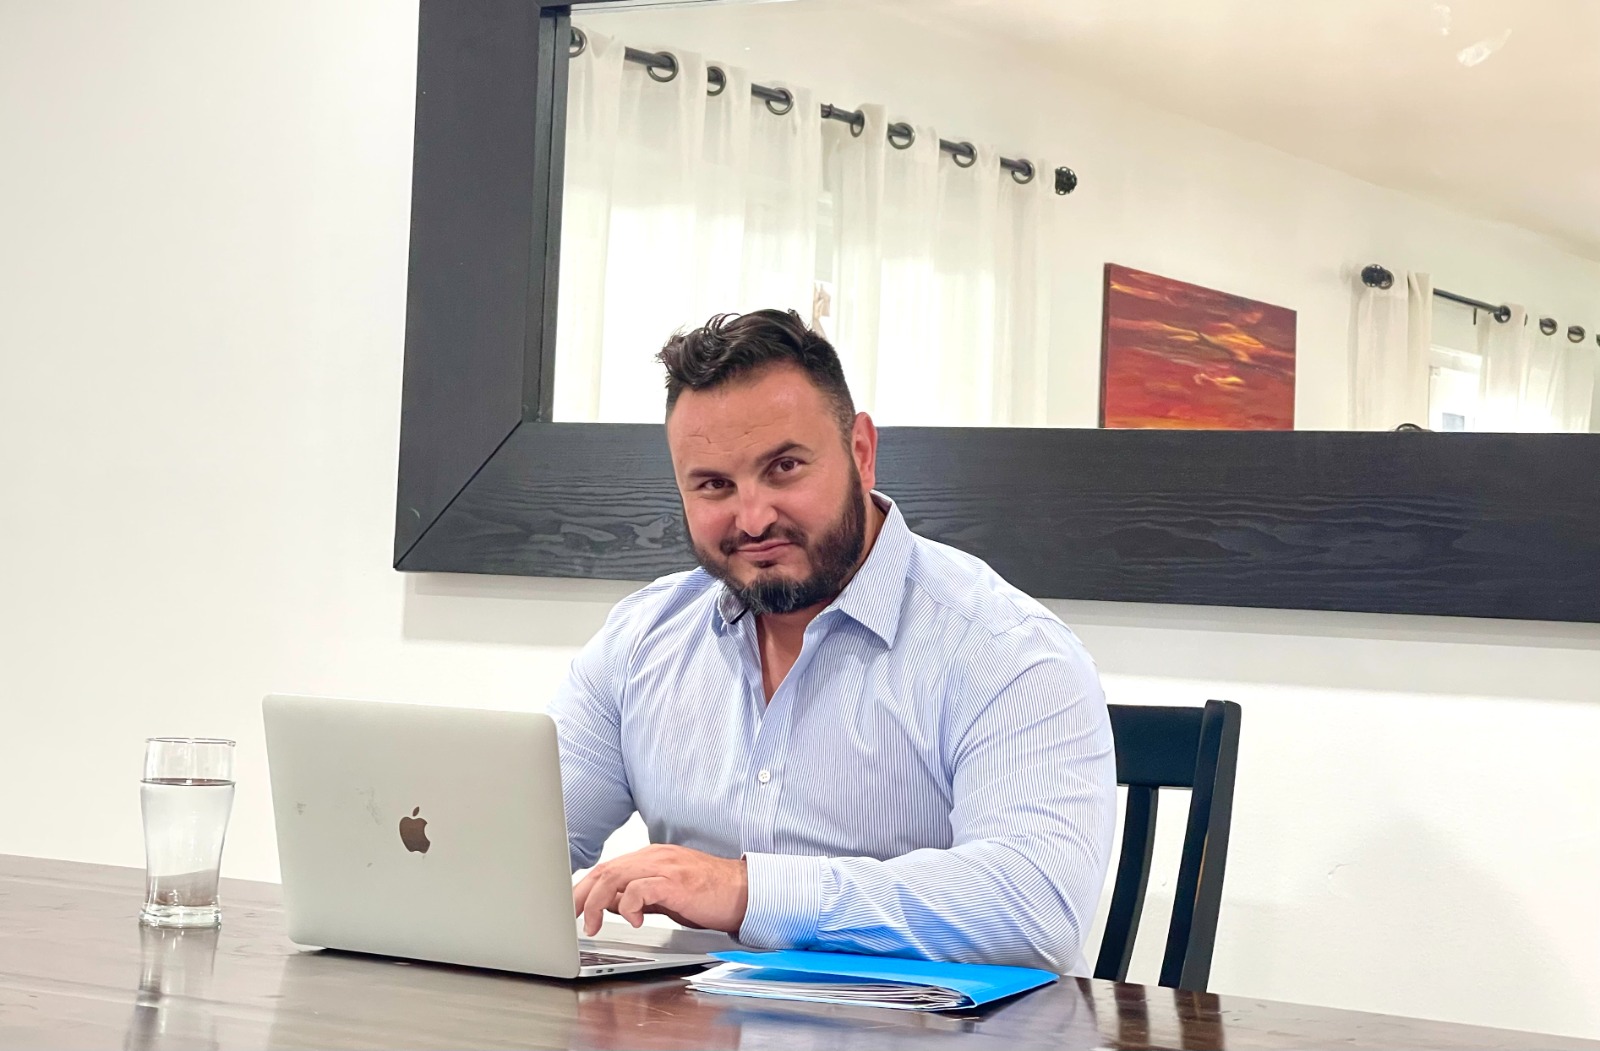 Federal Tactics Security is a Miami-Based Private Security Company that Provides Counterterrorism Security Services: Meet the Founder, Matias Zacconi